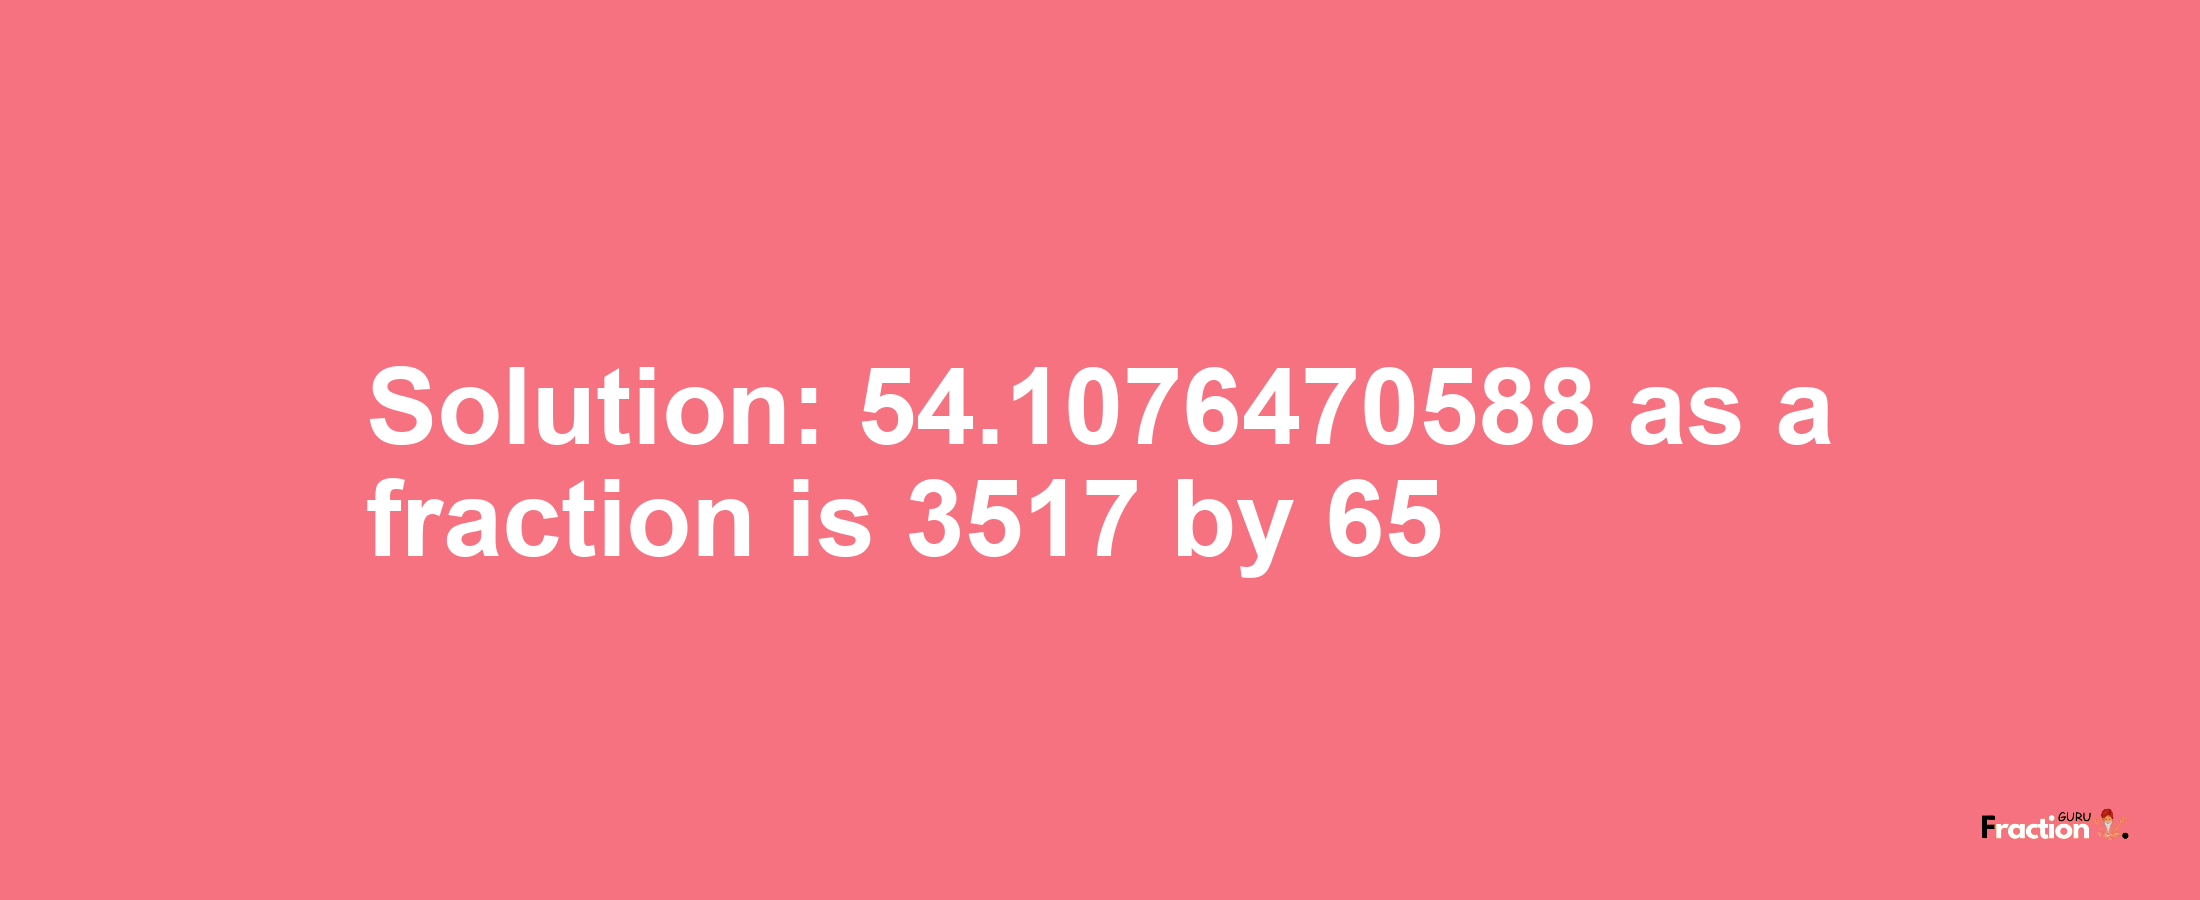 Solution:54.1076470588 as a fraction is 3517/65